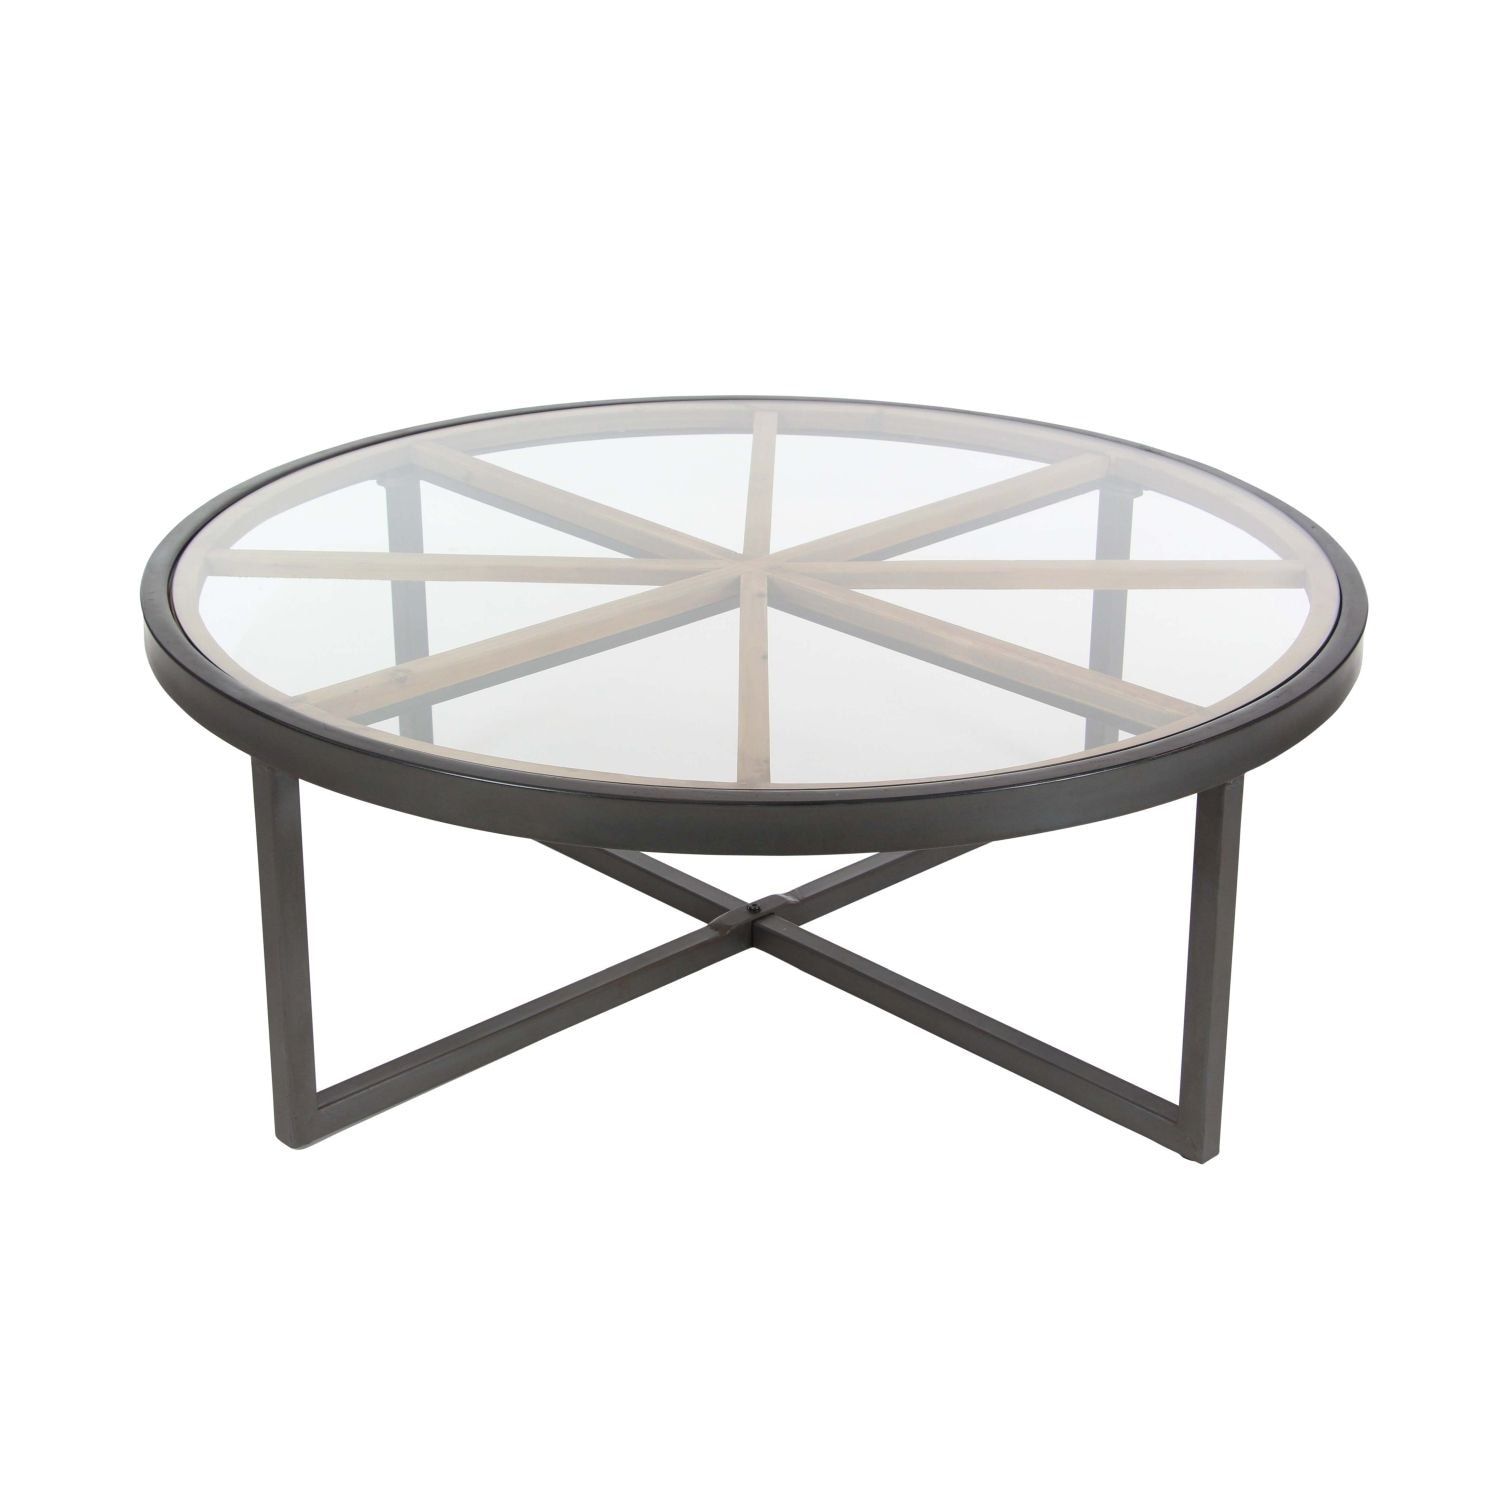 Studio 350 Metal Glass Wood Coffee Table 39 Inches Wide, 14 Inches High –  Bed Bath & Beyond – 17240699 With Studio 350 Black Metal Coffee Tables (View 10 of 15)